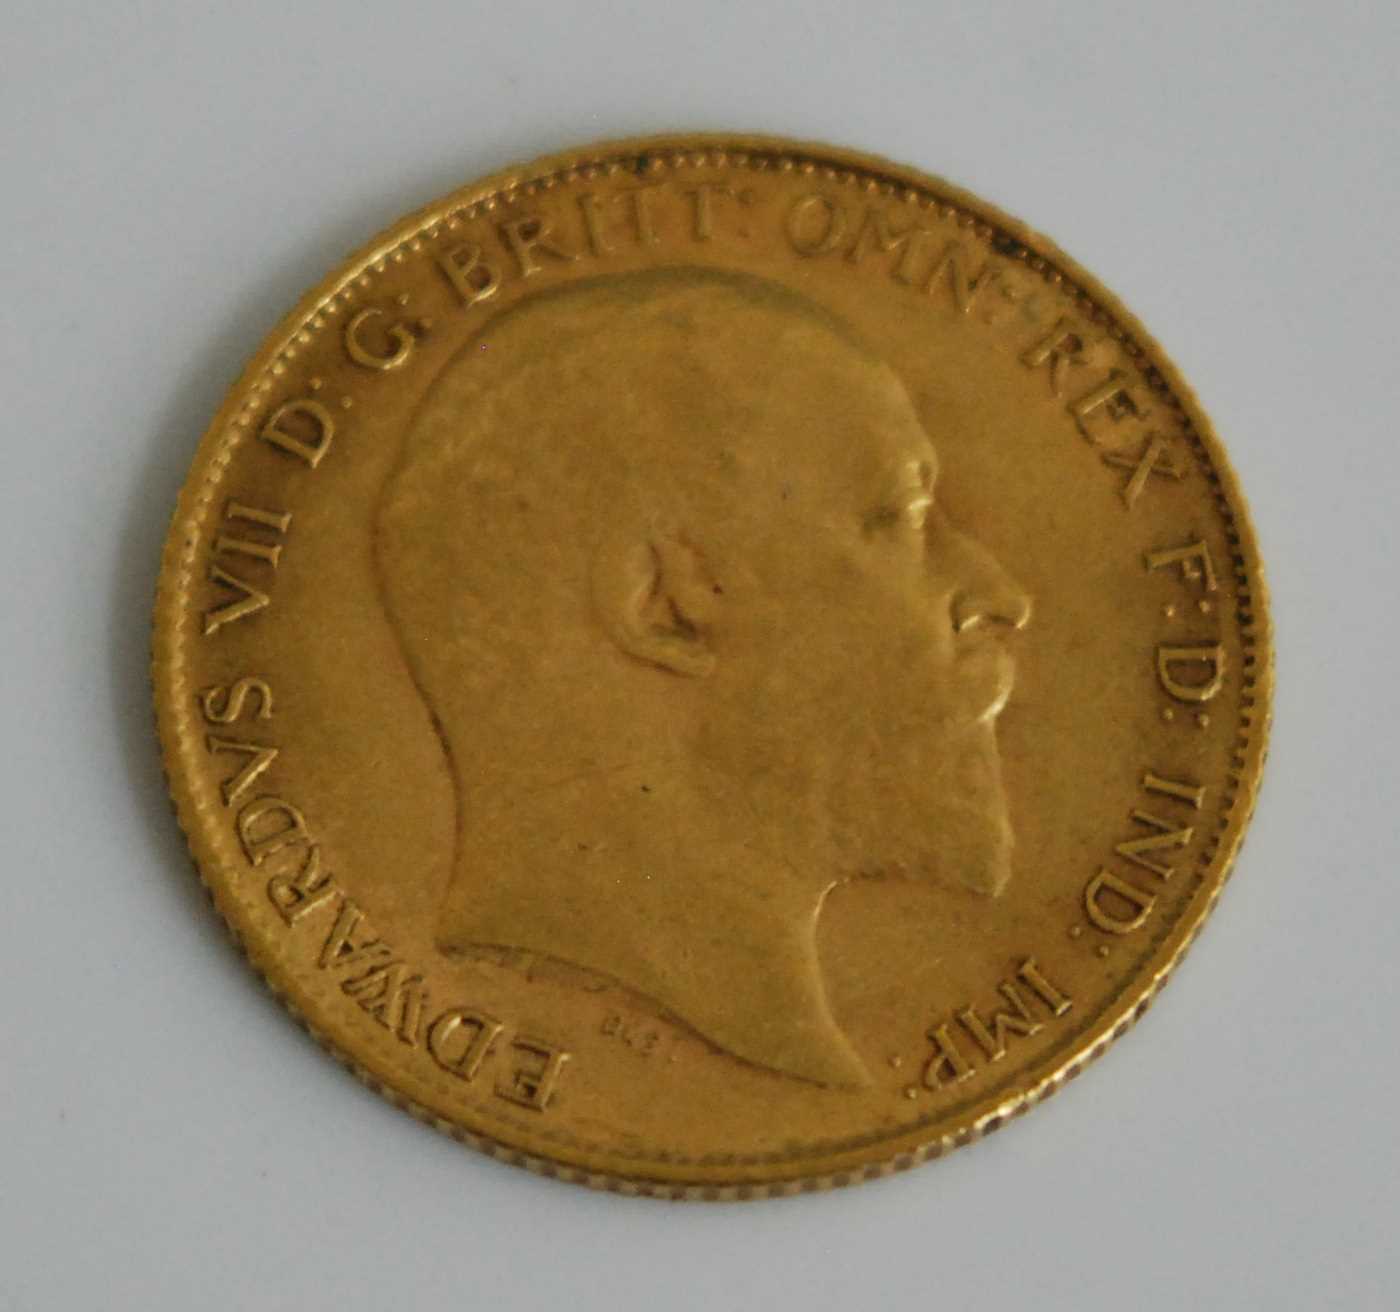 Lot 2032 - Great Britain, 1908 gold half sovereign,...